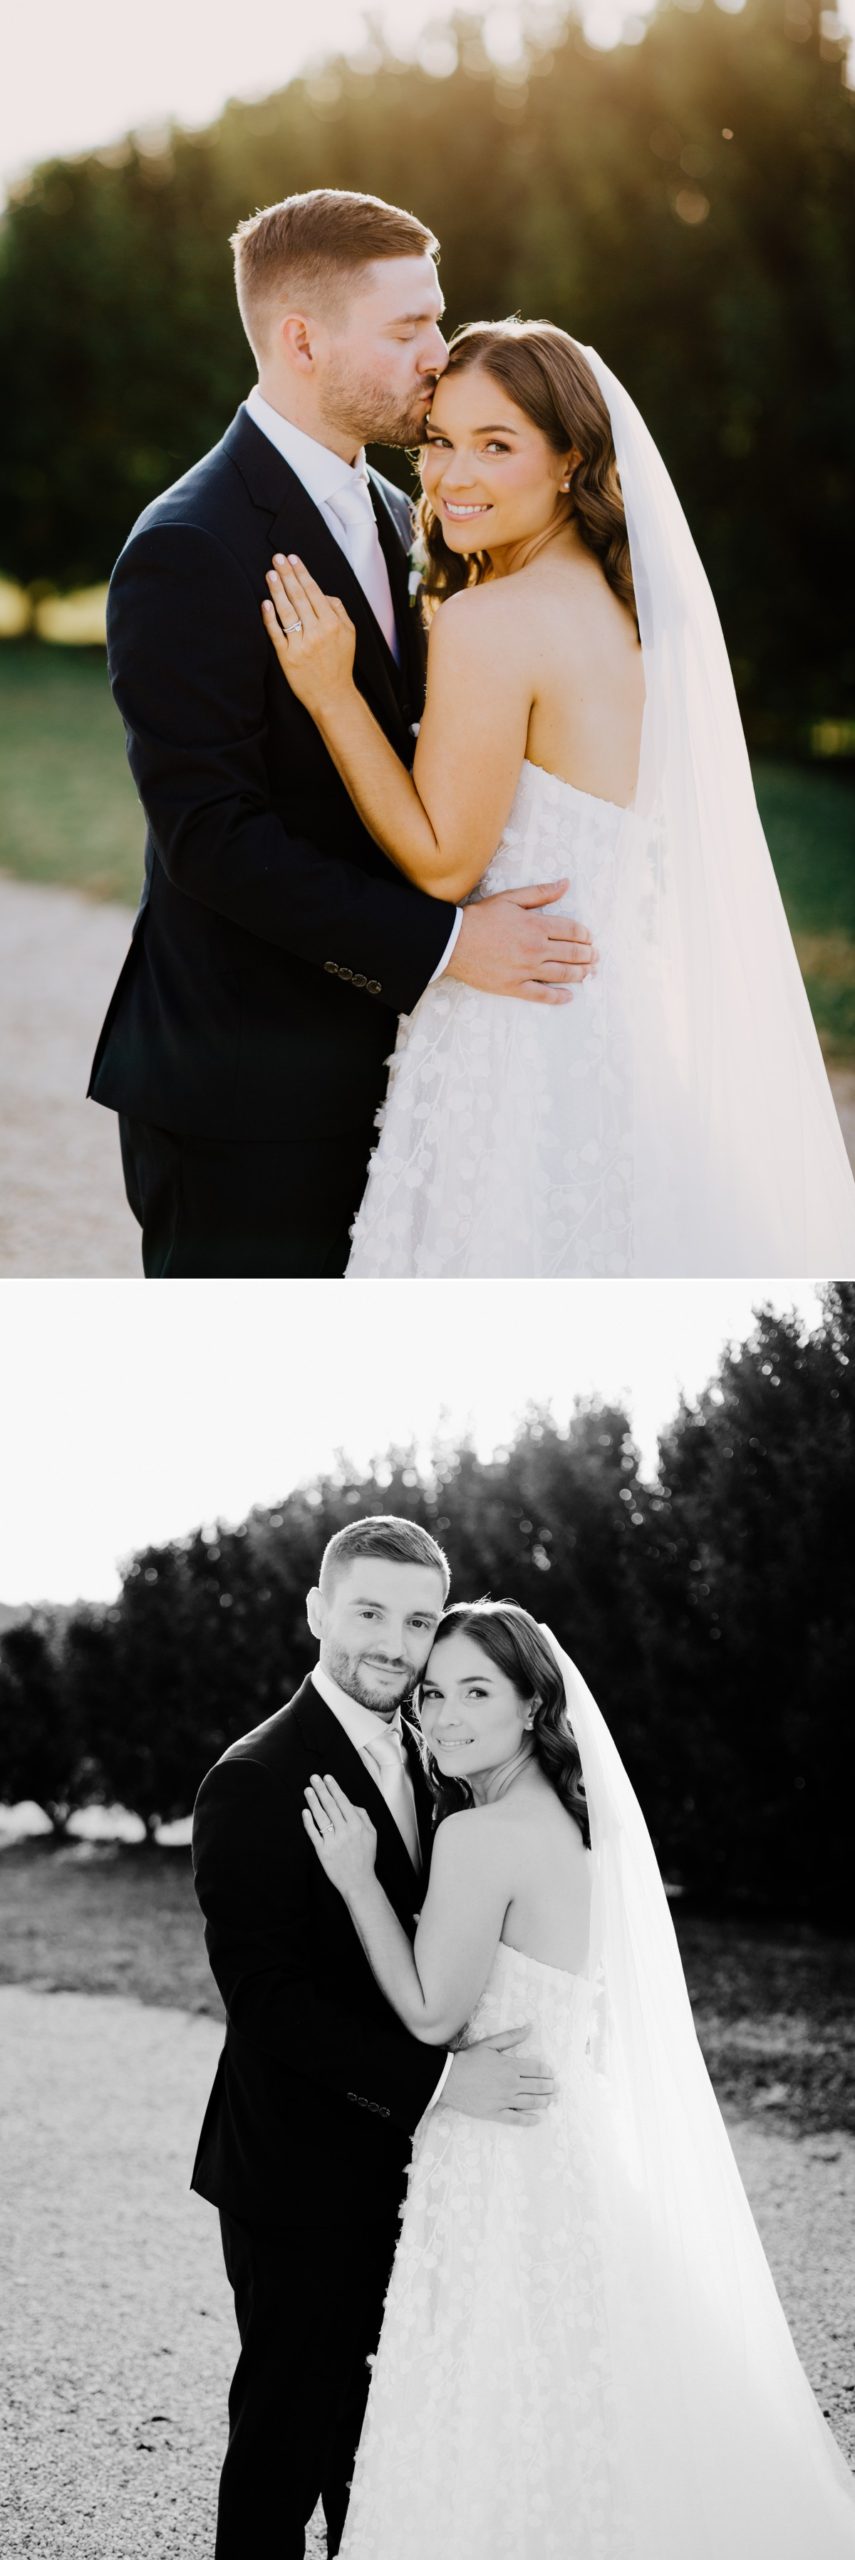 portrait photography of bride and groom